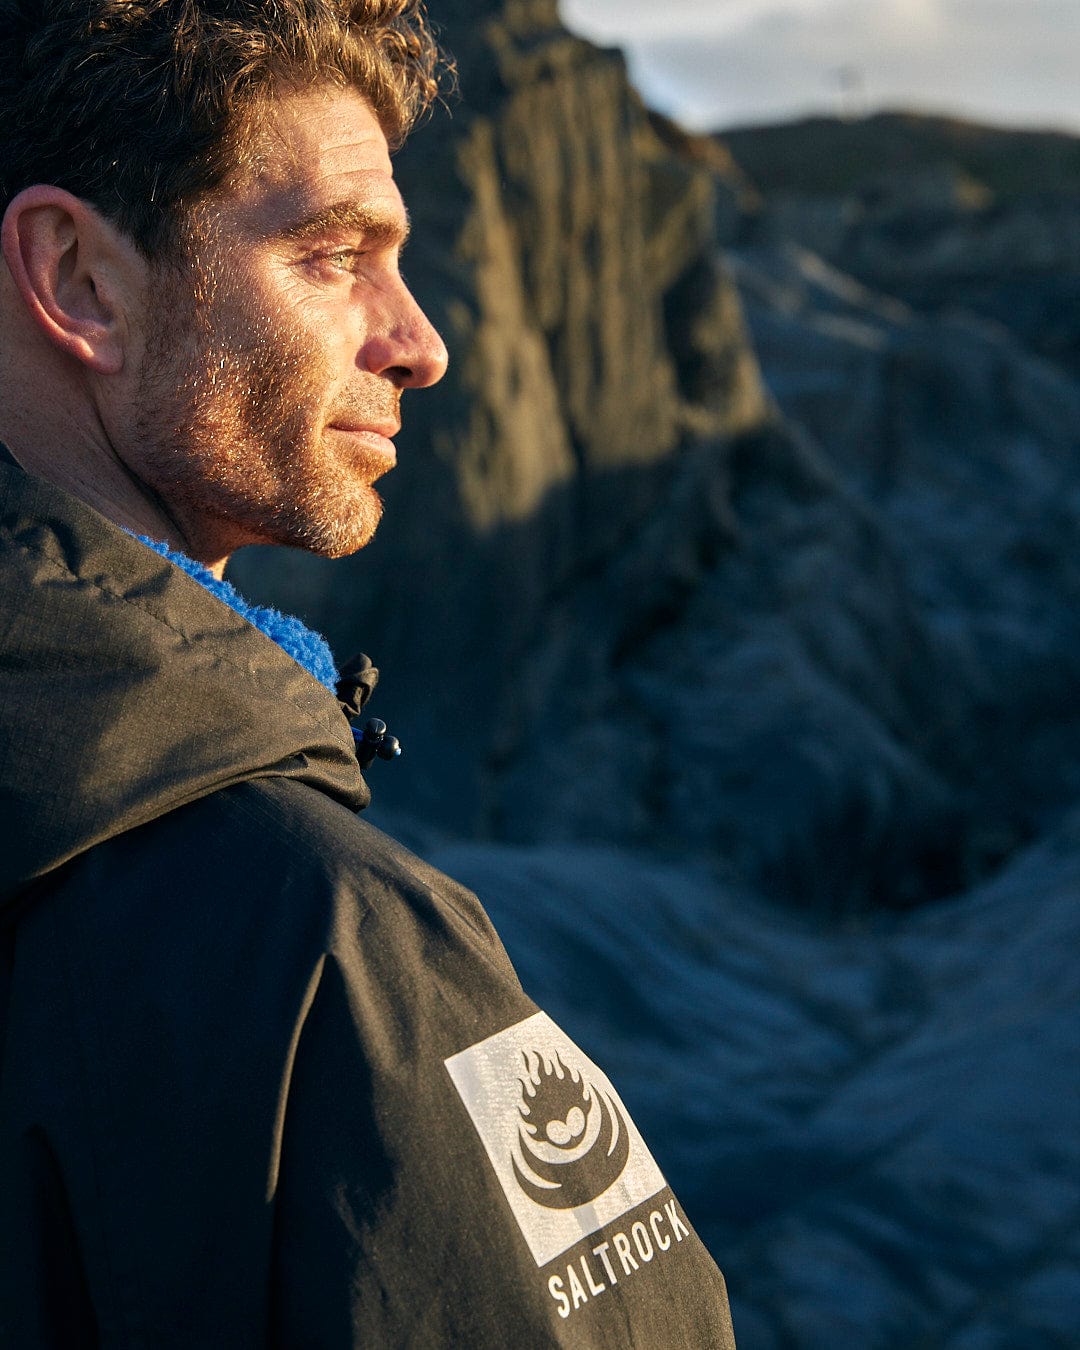 A man in a Saltrock black jacket standing in front of a cliff.